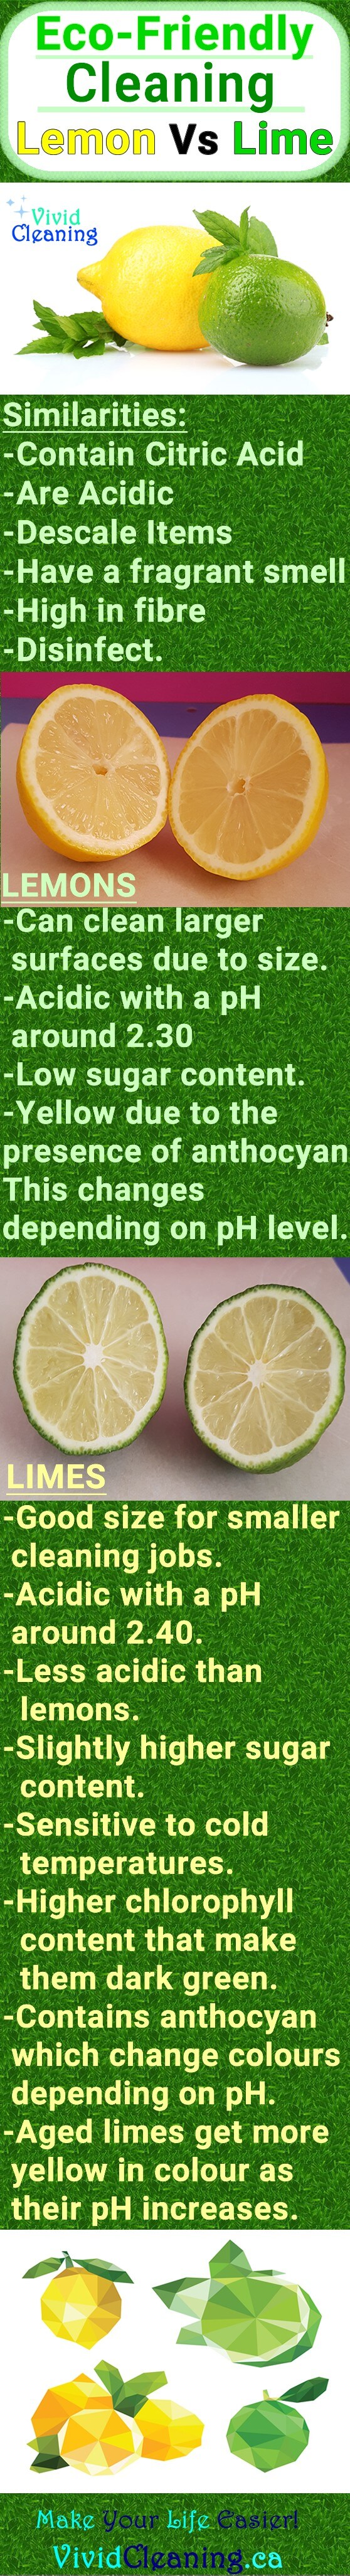 Similarities: -Contain Citric Acid -Are Acidic -Descale Items -Have a fragrant smell -High in fibre -Disinfect. Lemons: -Can clean larger surfaces due to size. -Acidic with a pH around 2.30 -Low sugar content. -Yellow due to the presence of anthocyan This changes depending on pH level. Limes -Good size for smaller cleaning jobs. -Acidic with a pH around 2.40. -Less acidic than lemons. -Slightly higher sugar content. -Sensitive to cold temperatures. -Higher chlorophyll content that make them dark green. -Contains anthocyan which change colours depending on pH. -Aged limes get more yellow in colour as their pH increases.